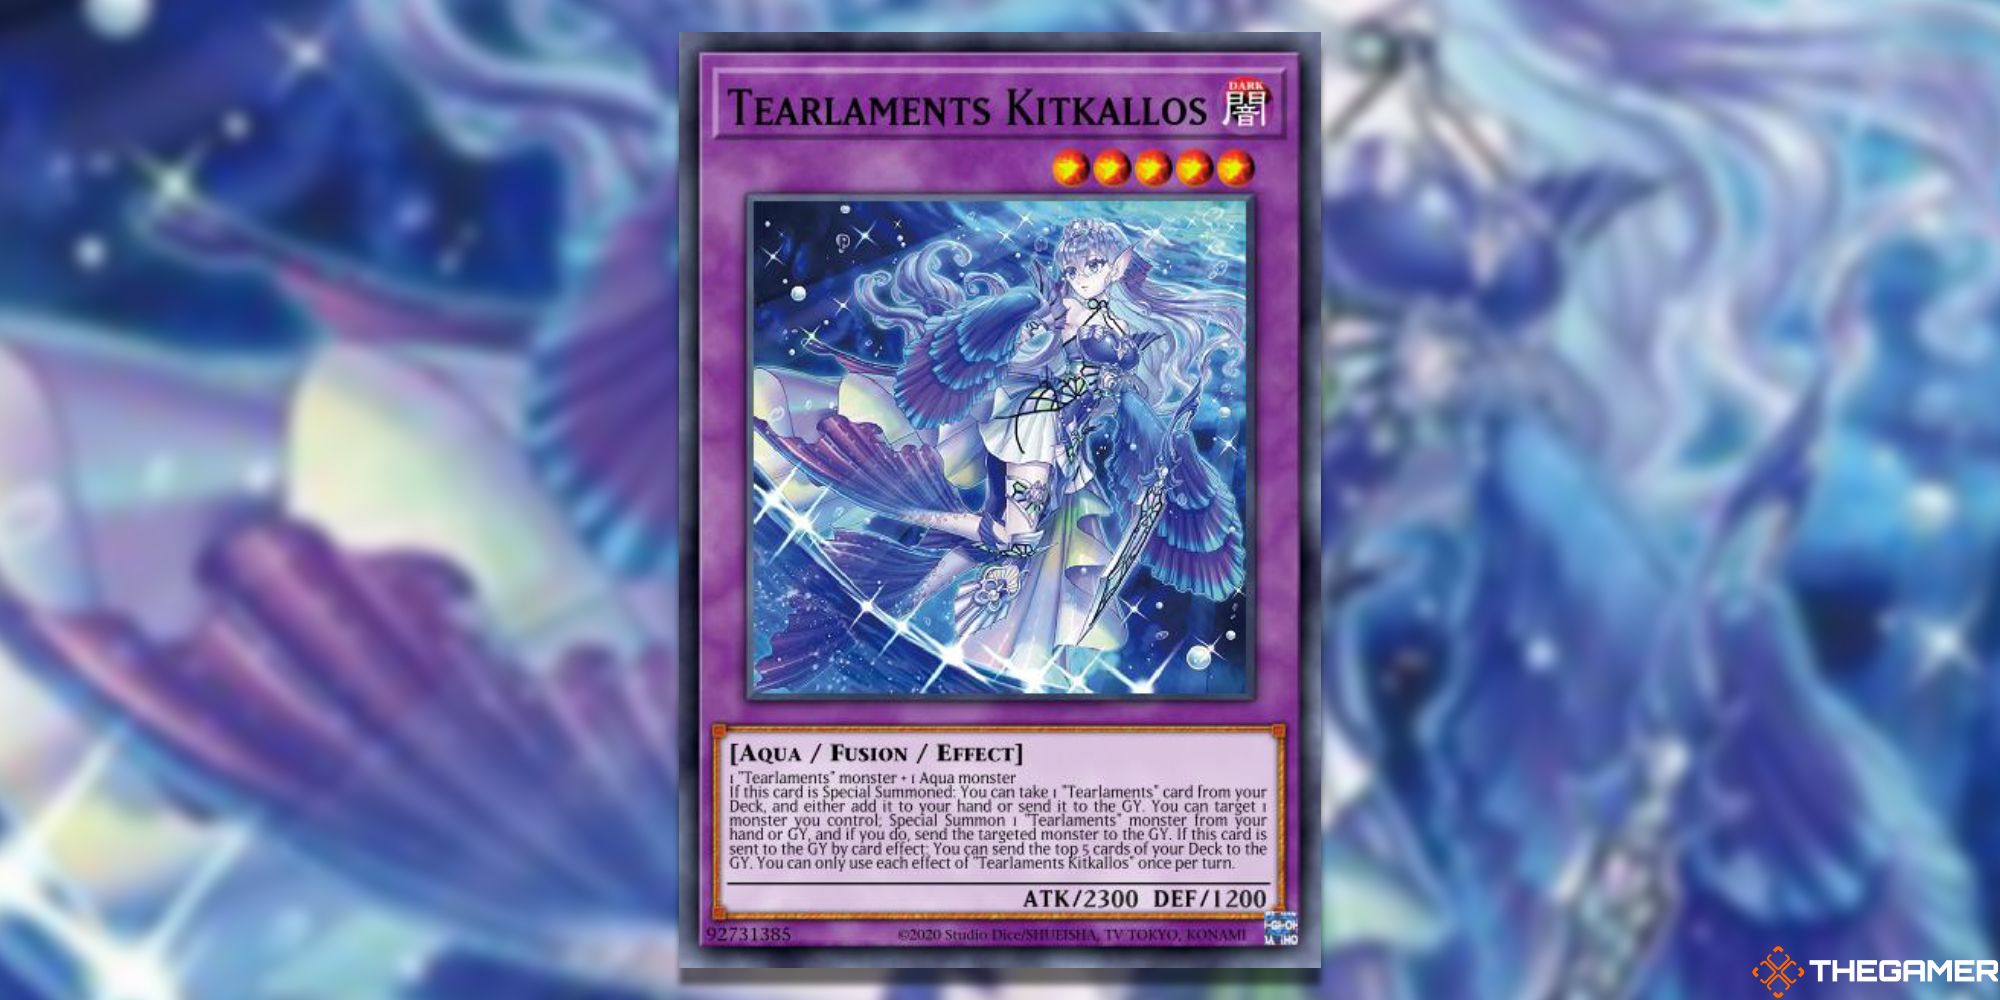 Tiaraments Kitkaros Full Card with Gauss Blur from Yu-Gi-Oh!master duel